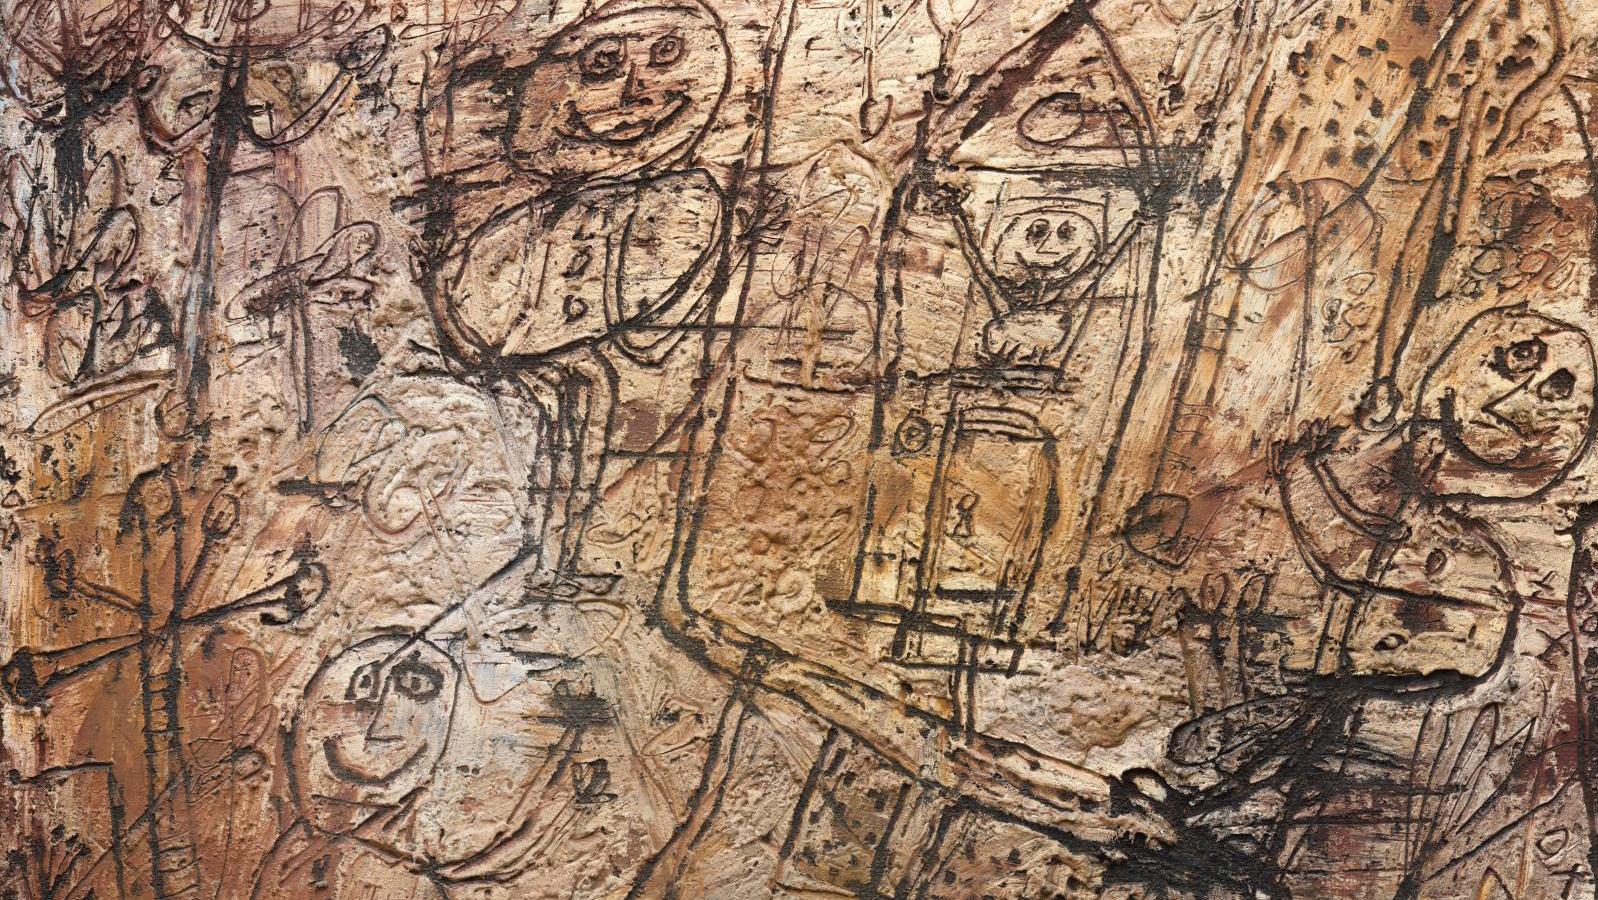 Dubuffet and Kopac: An Obsession with Material